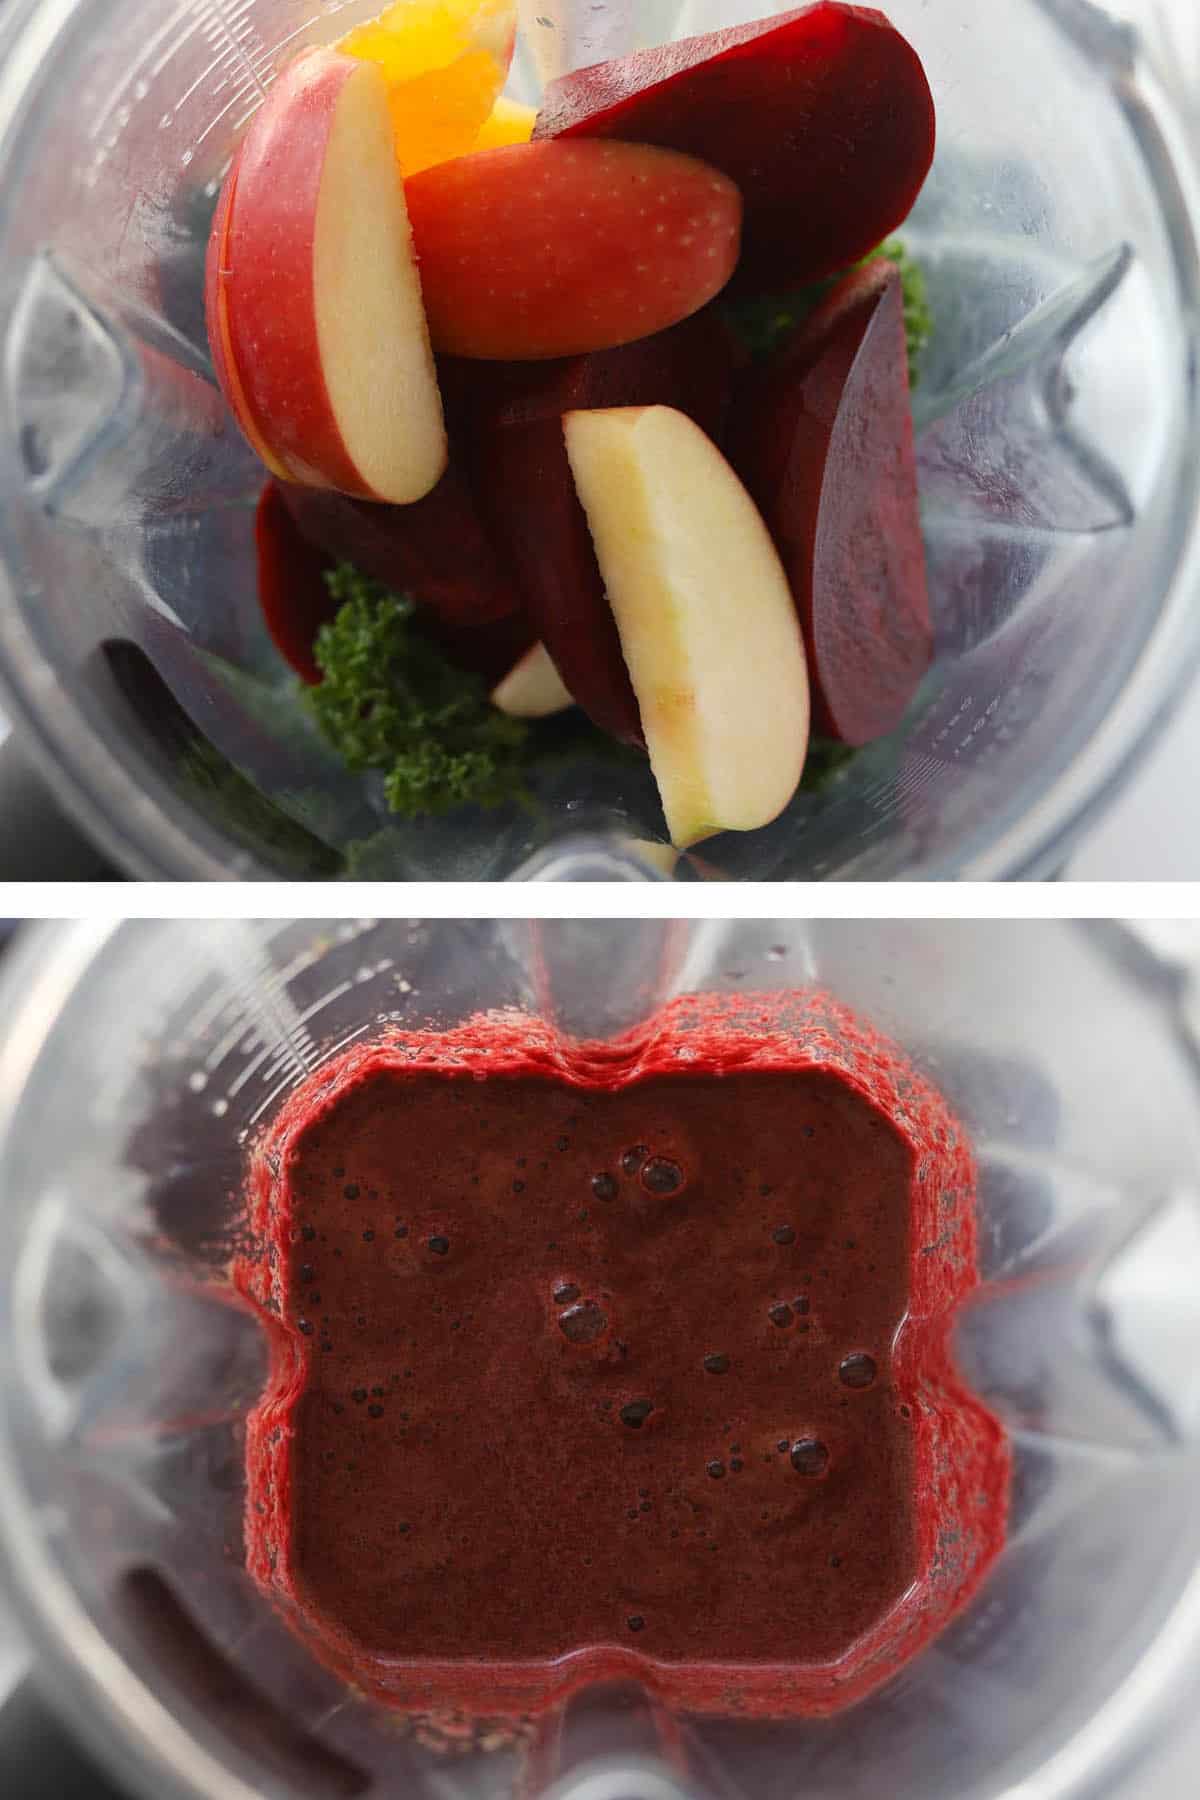 Collage of two images. Top image of fruit and green kale in a blender. Bottom image of blended fruit and vegetables.